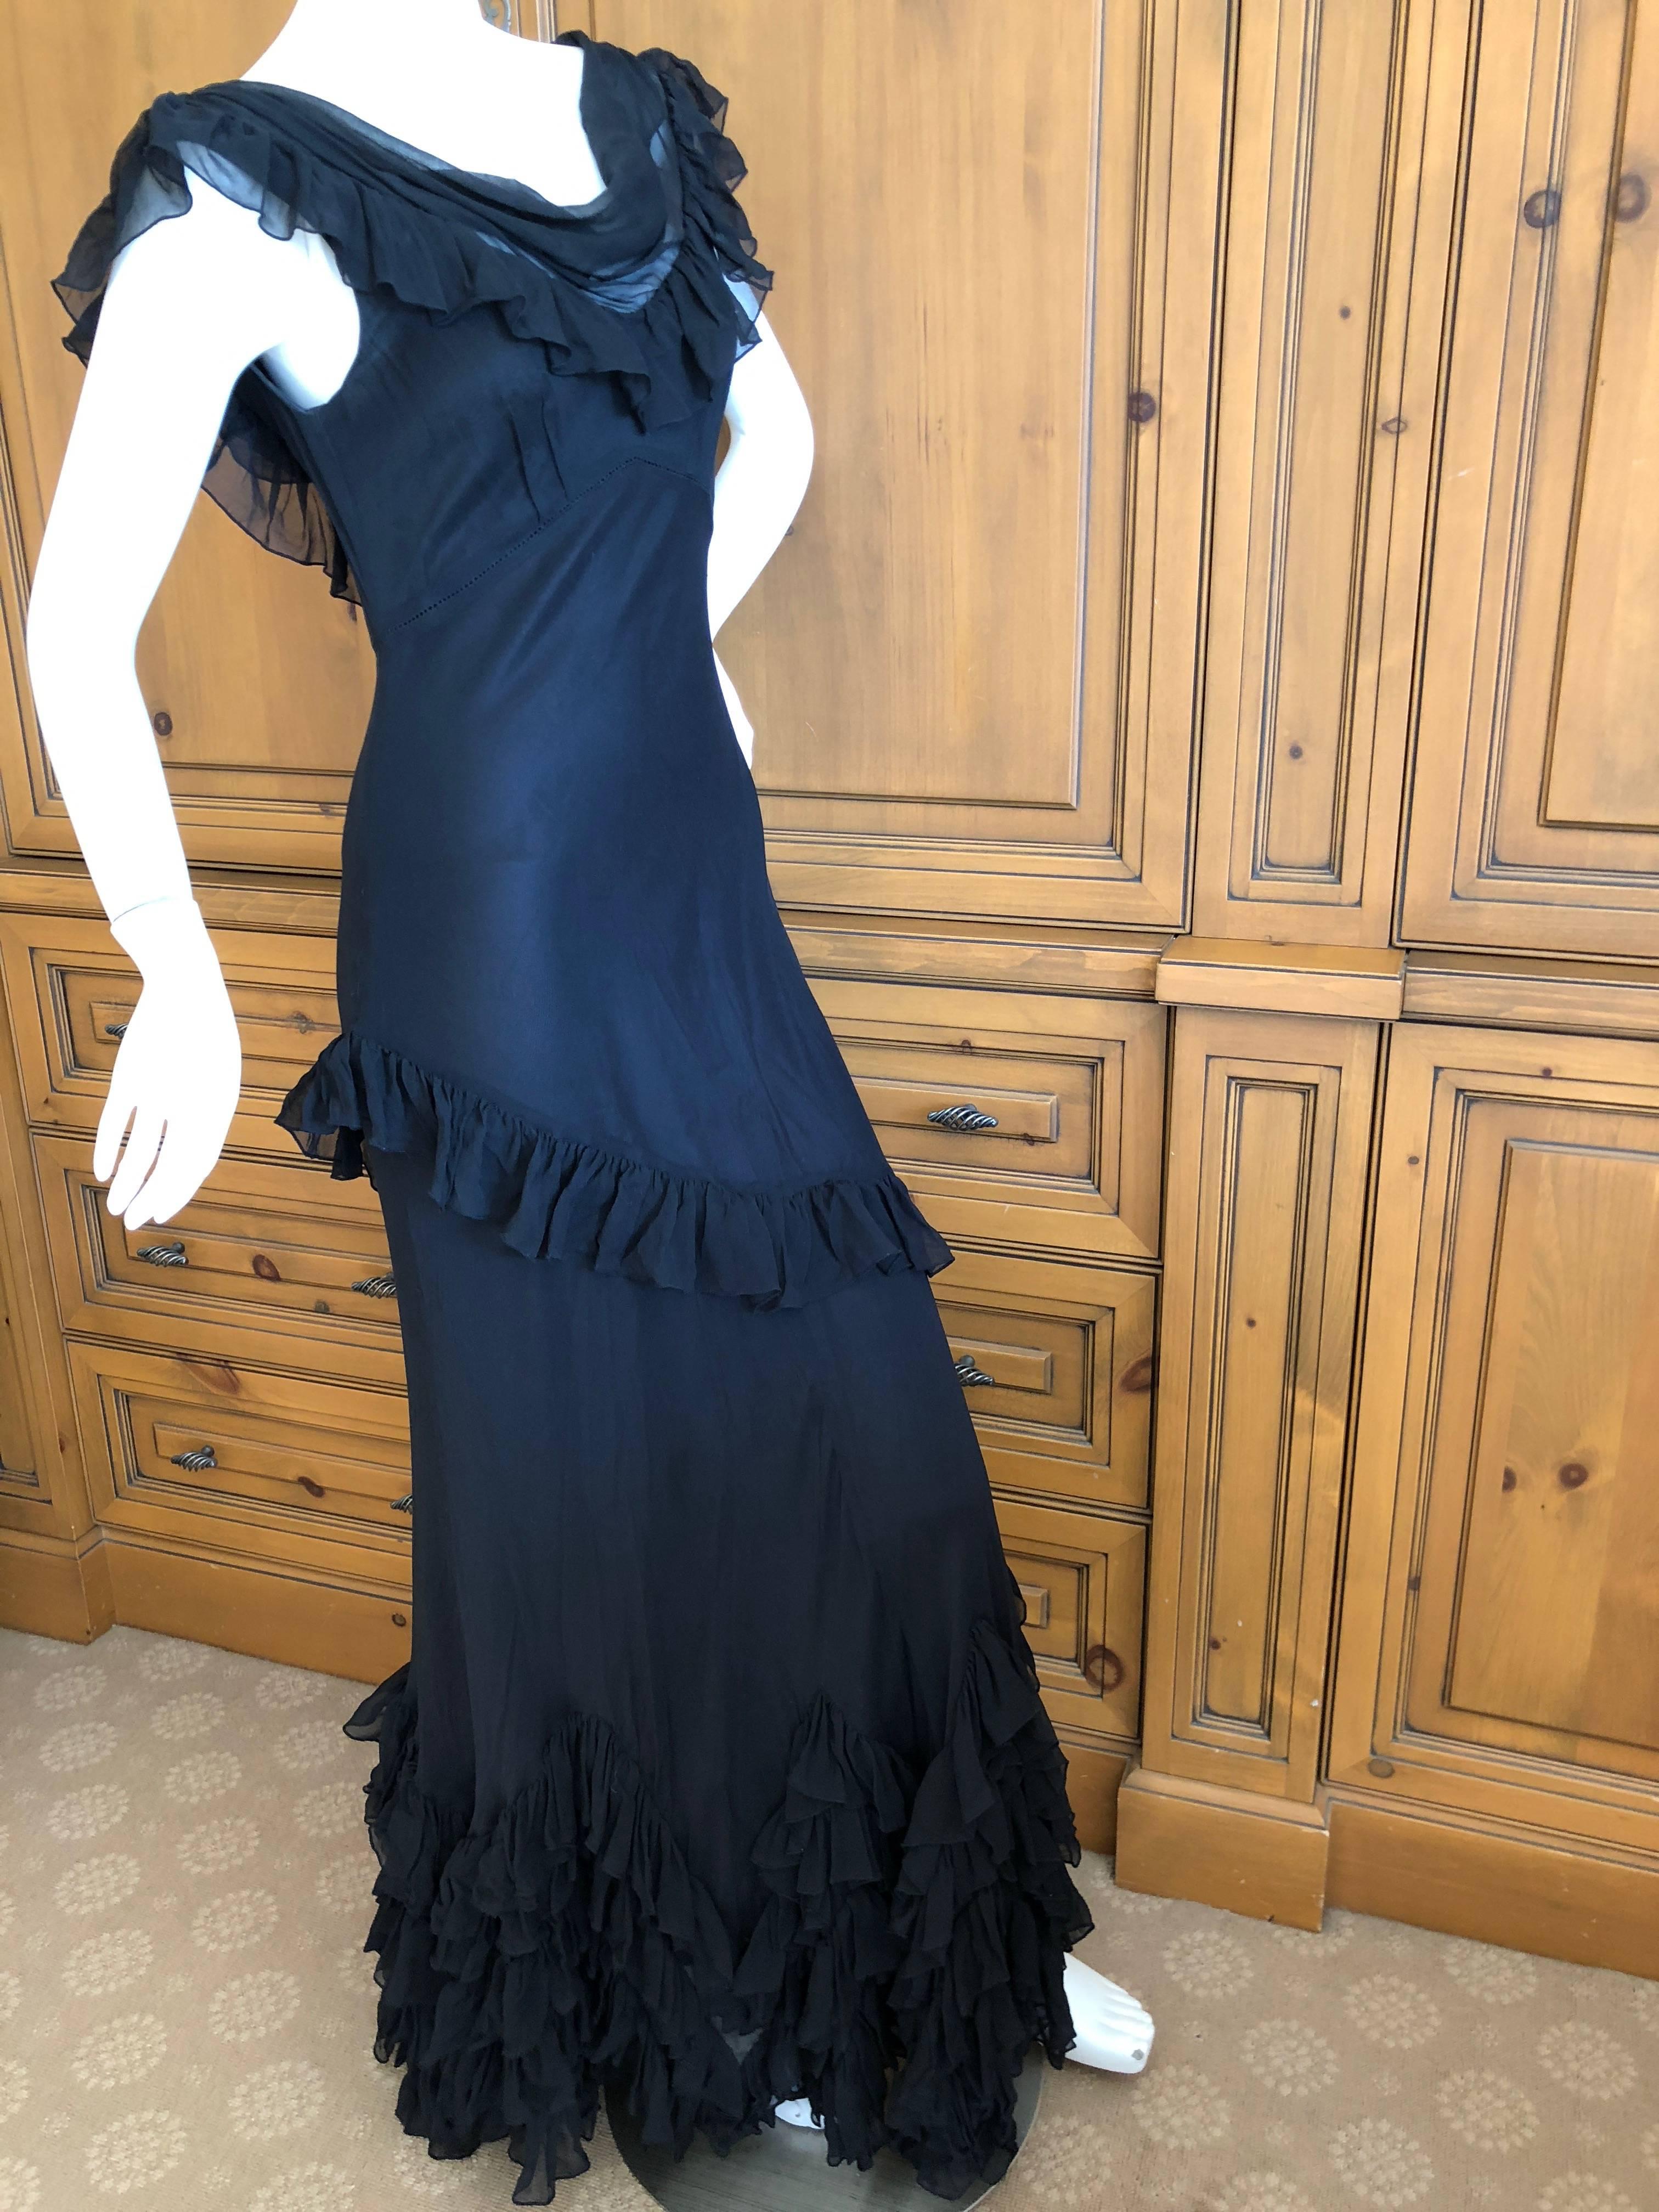  John Galliano Black Sheer Vintage Silk Ruffled Evening Dress with Cowl Back  For Sale 1